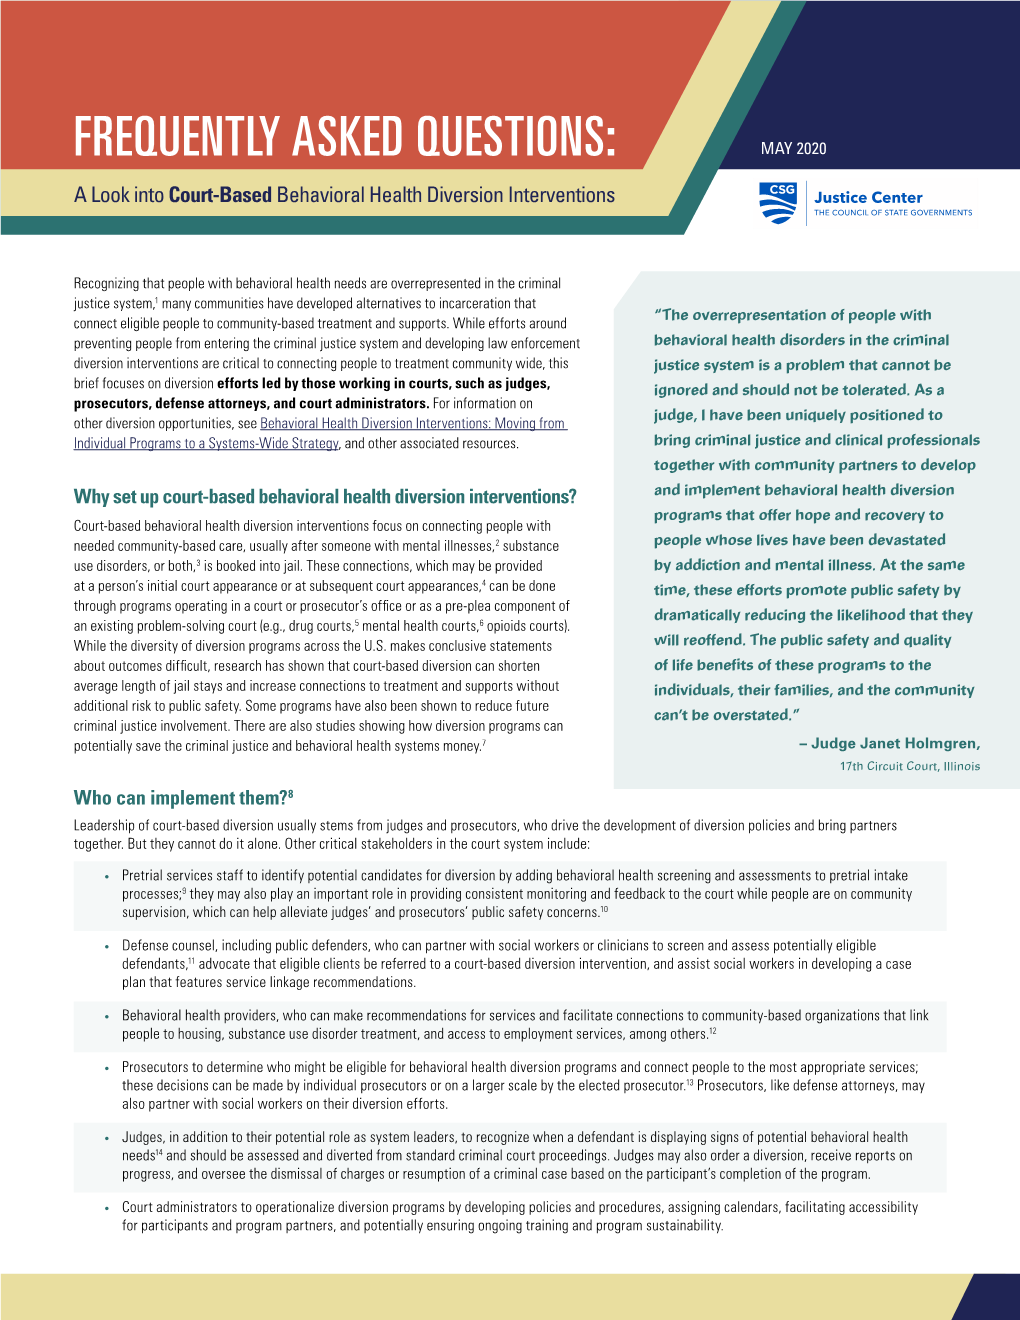 A Look Into Court-Based Behavioral Health Diversion Interventions